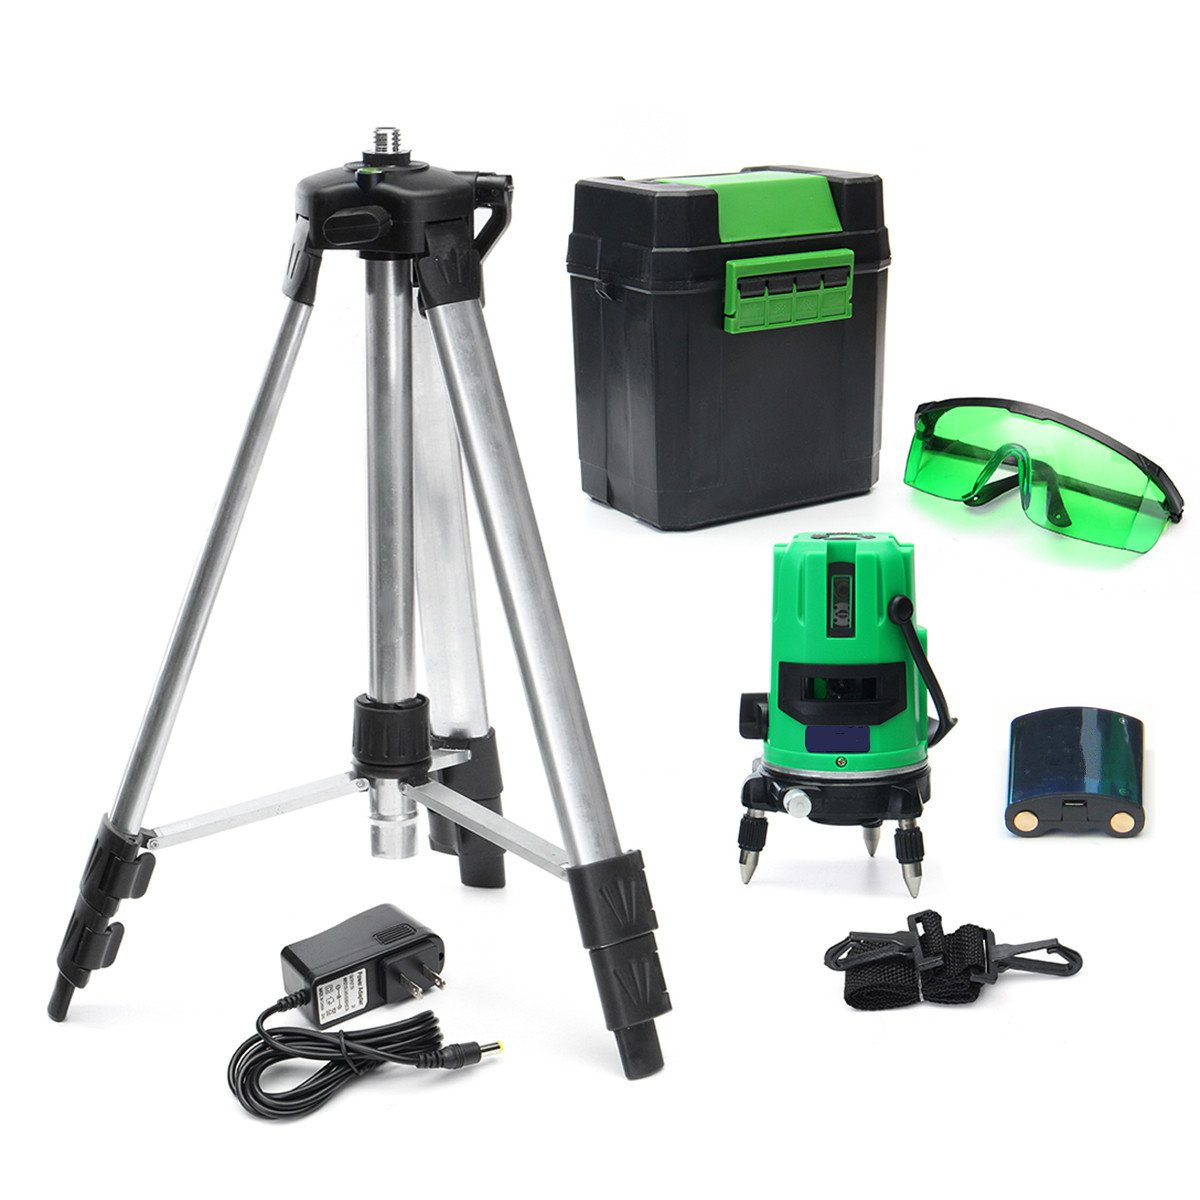 Green-2-Line-2-Points-Laser-Level-360-Rotary-Laser-Line-Self-Leveling-with-Tripod-1166735-9